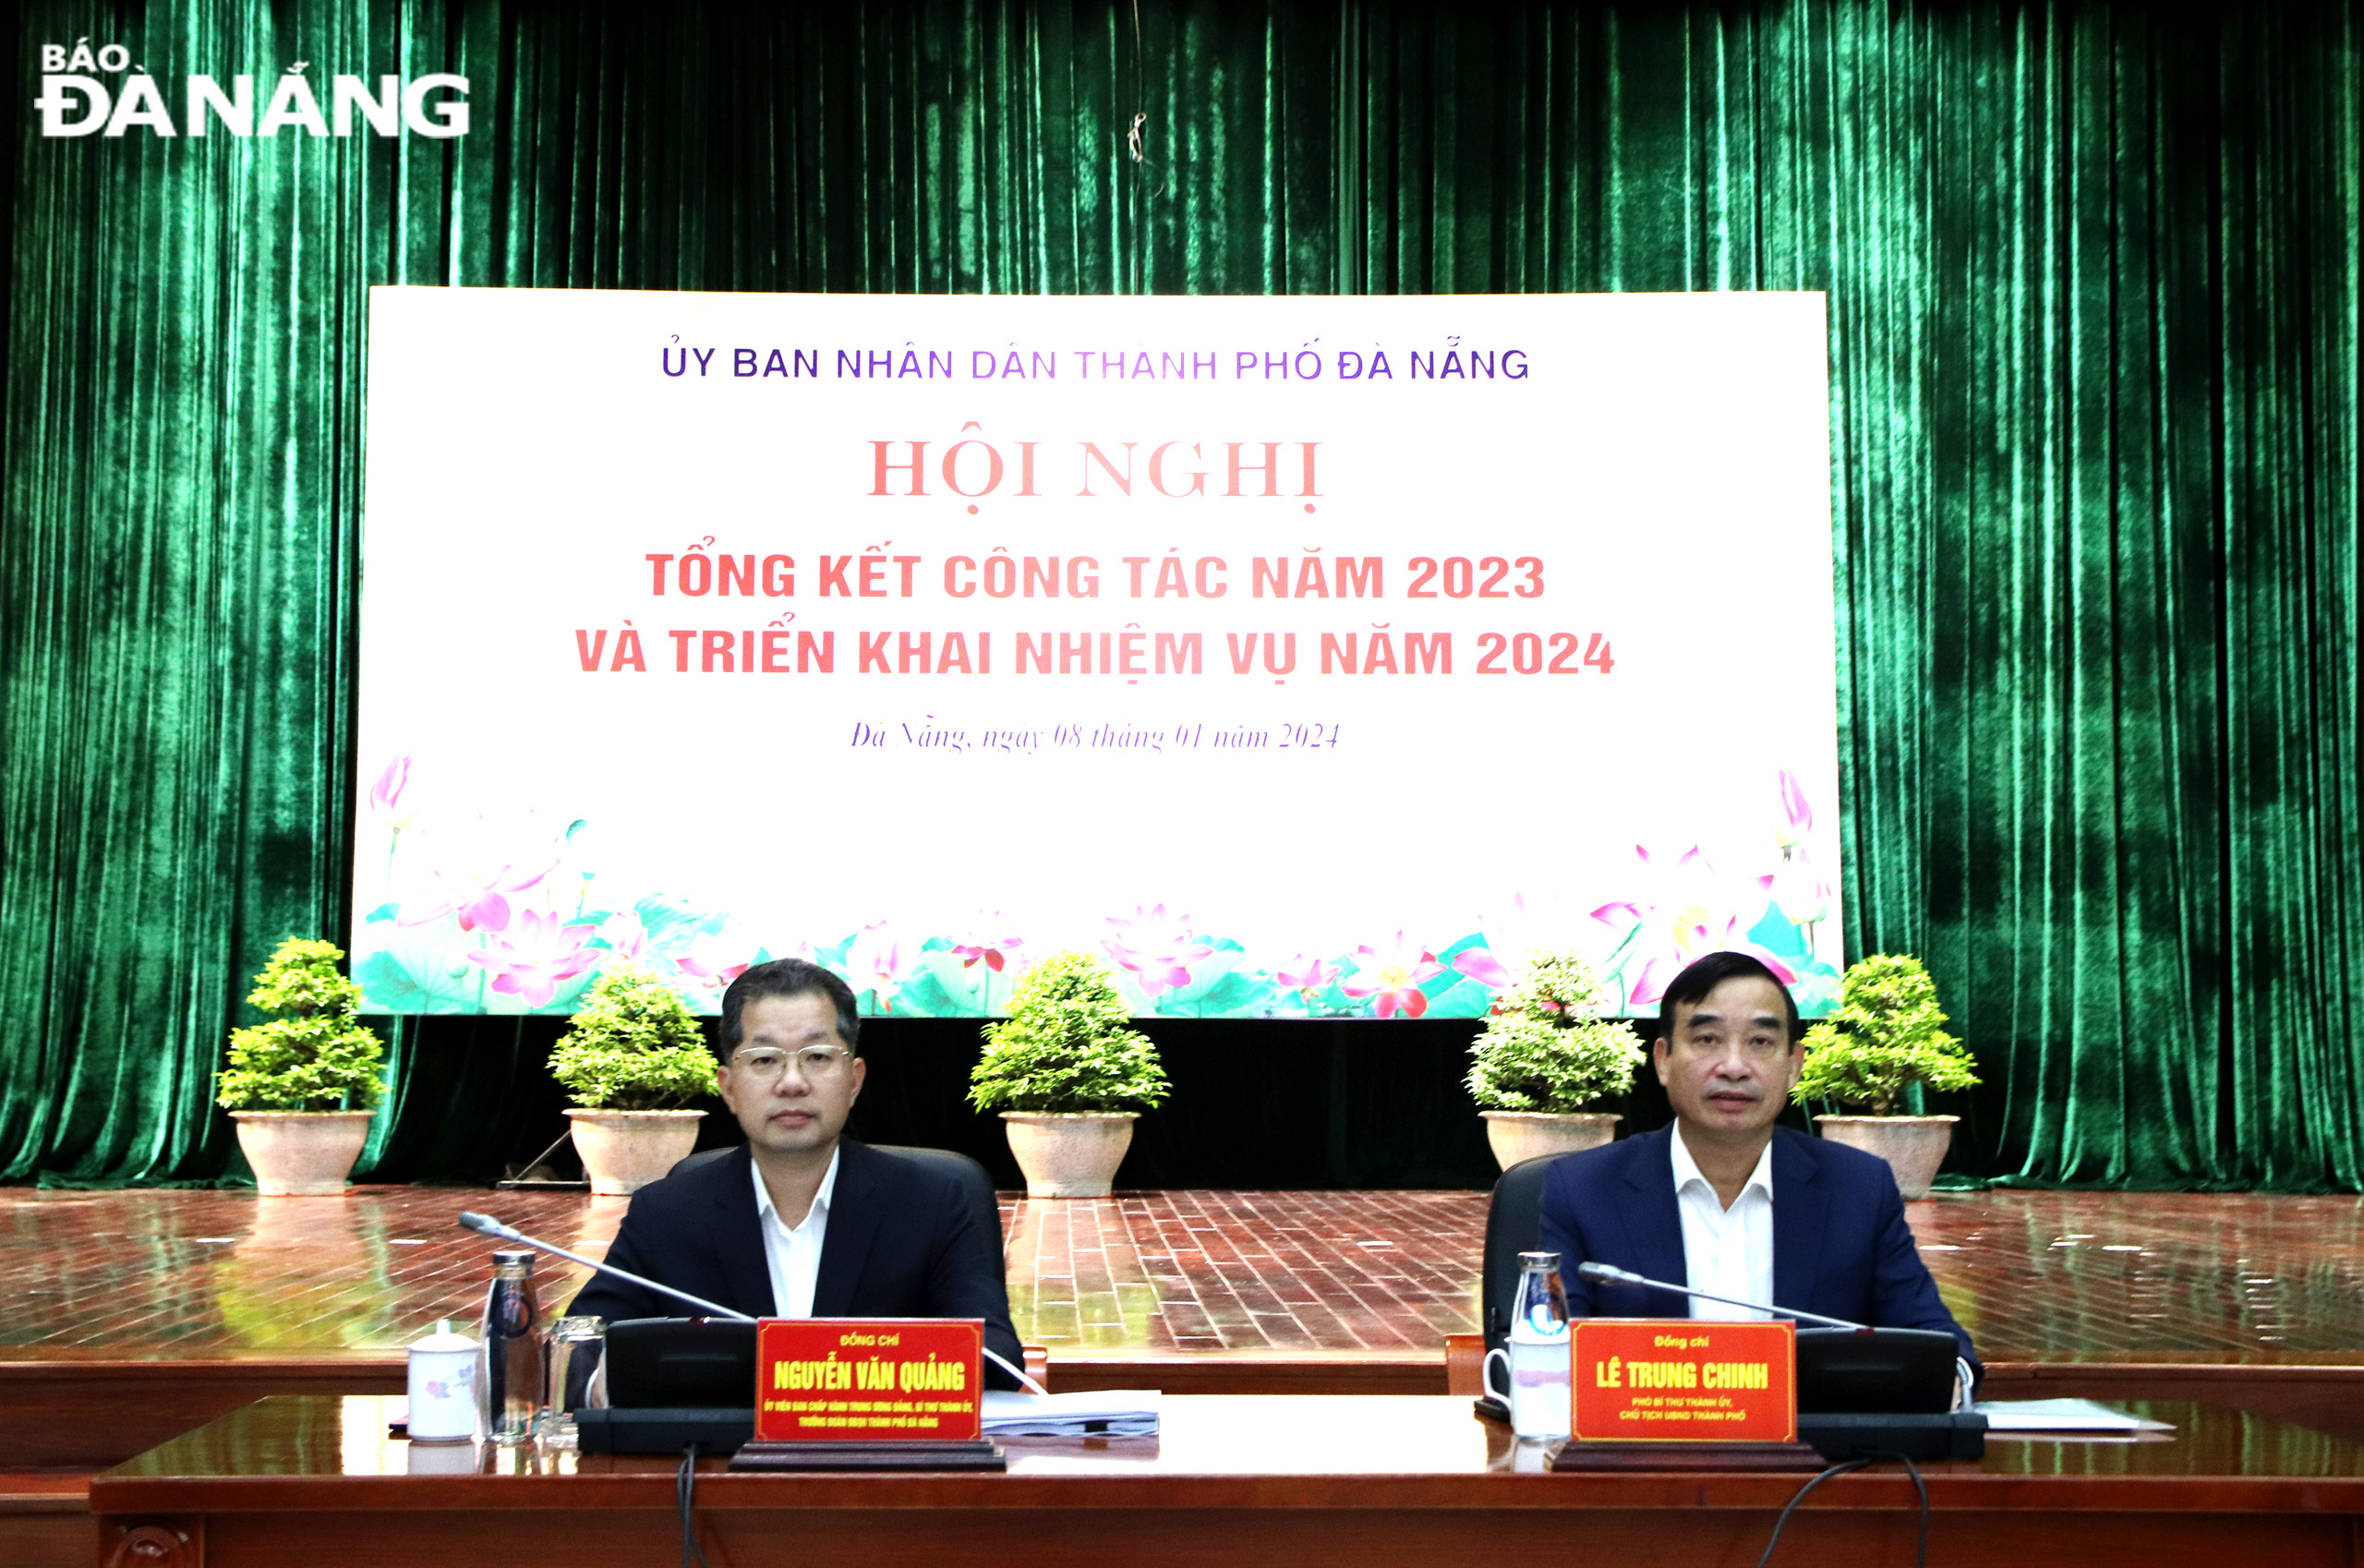 Da Nang Party Committee Secretary Nguyen Van Quang (left) and municipal People's Committee Chairman Le Trung Chinh co-chairing the event